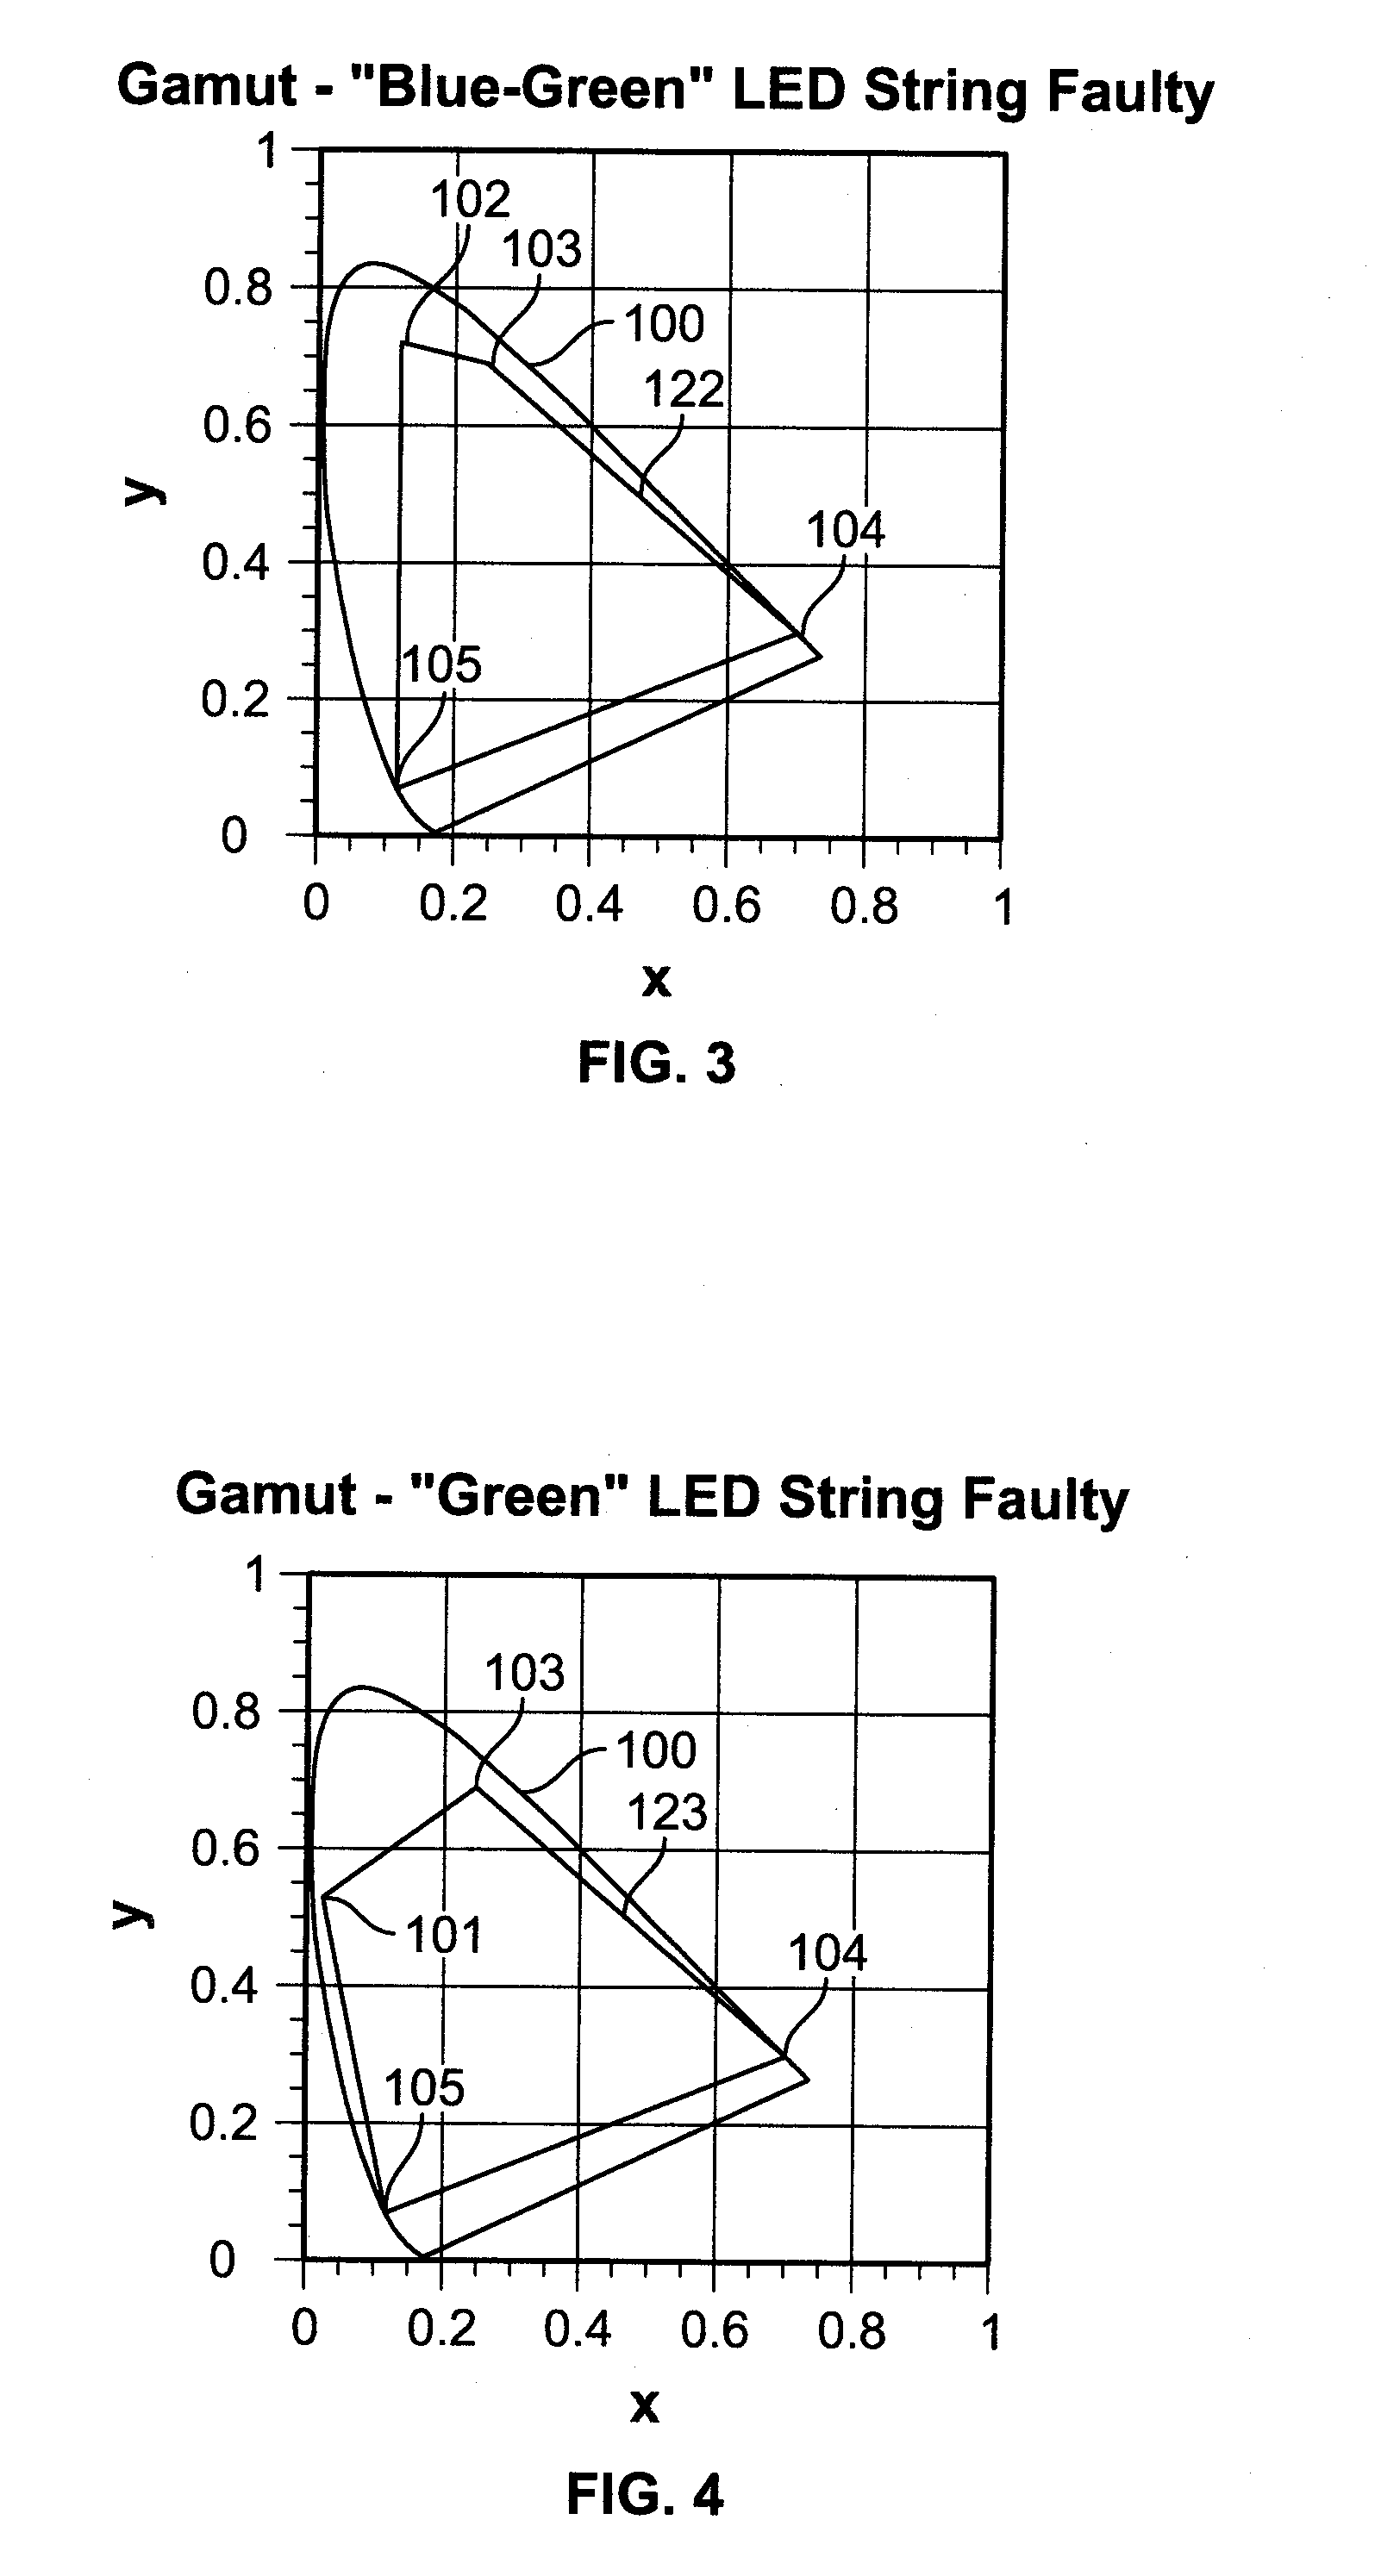 Method for computing drive currents for a plurality of leds in a pixel of a signboard to achieve a desired color at a desired luminous intensity